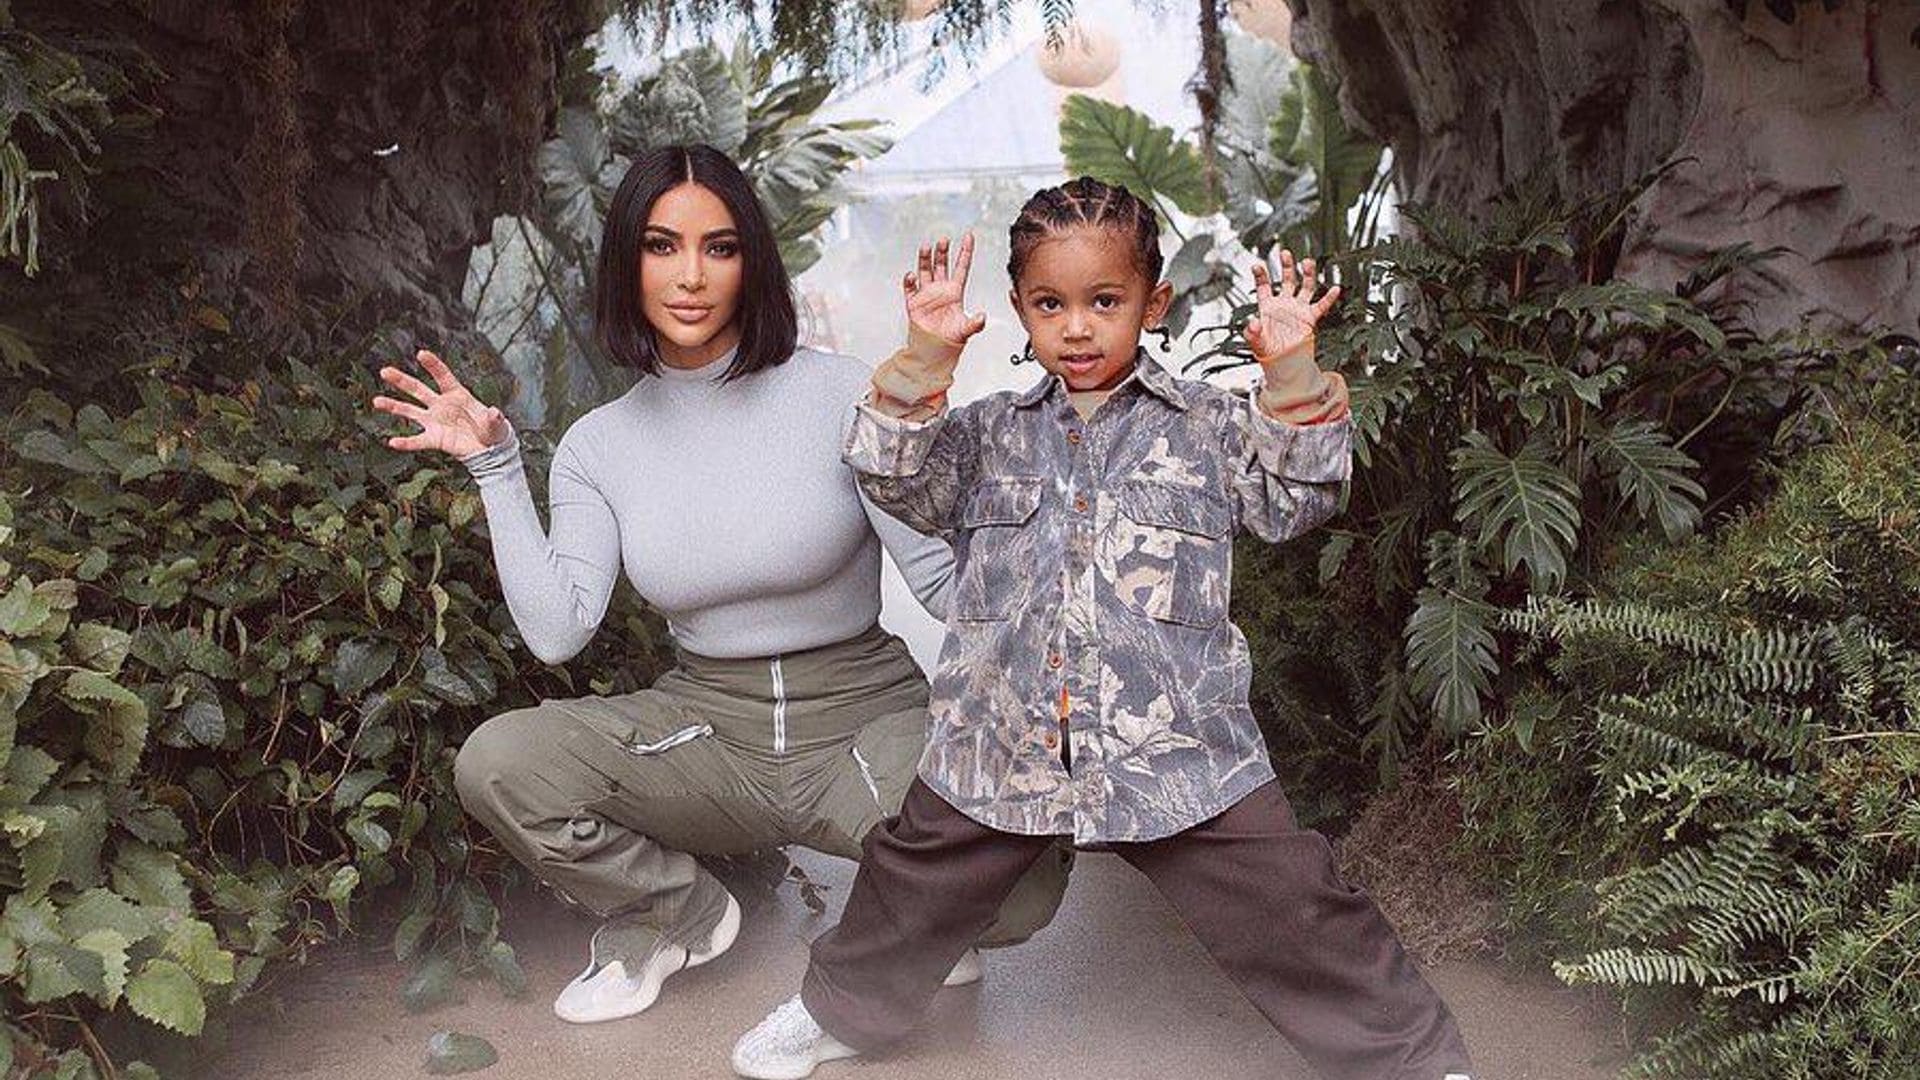 Kim Kardashian and Kanye West’s son Saint reveals her ‘true age’ and other fun facts about mom